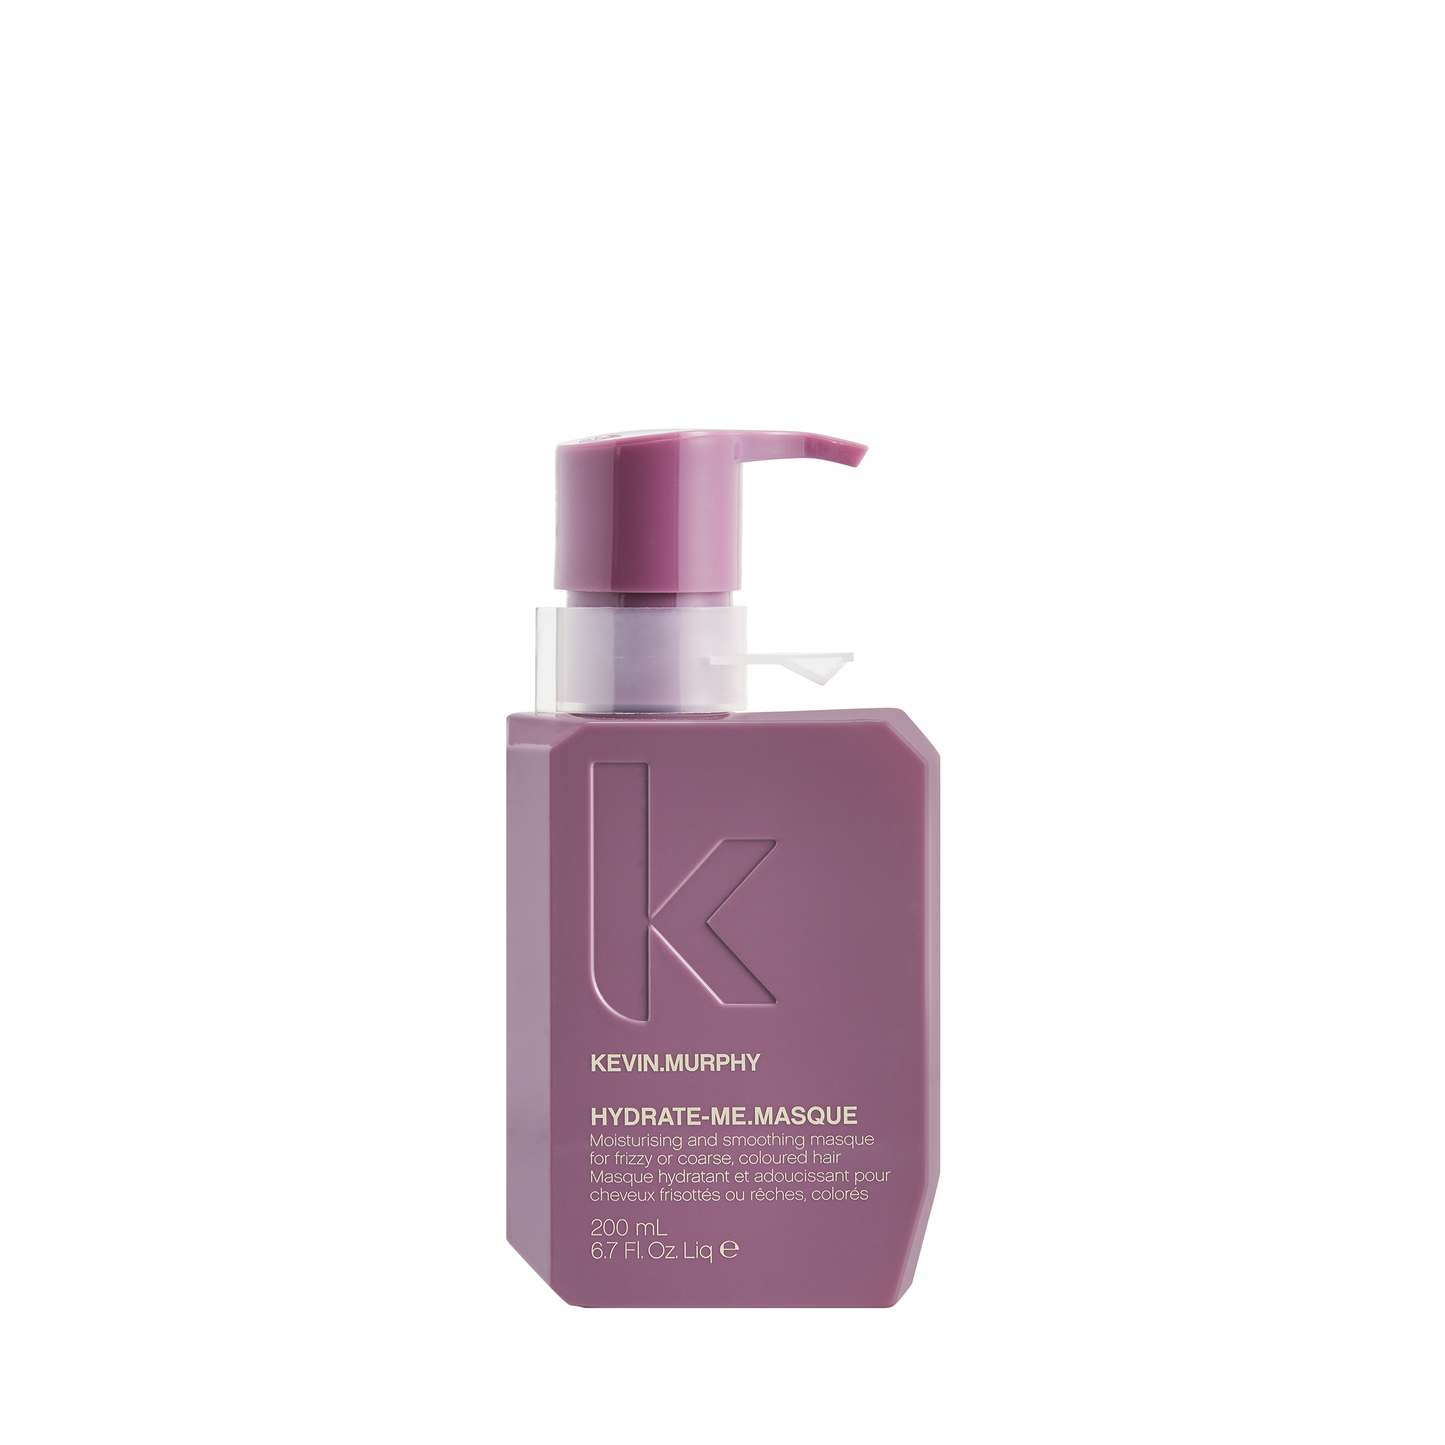 KEVIN.MURPHY - HYDRATE-ME.MASQUE